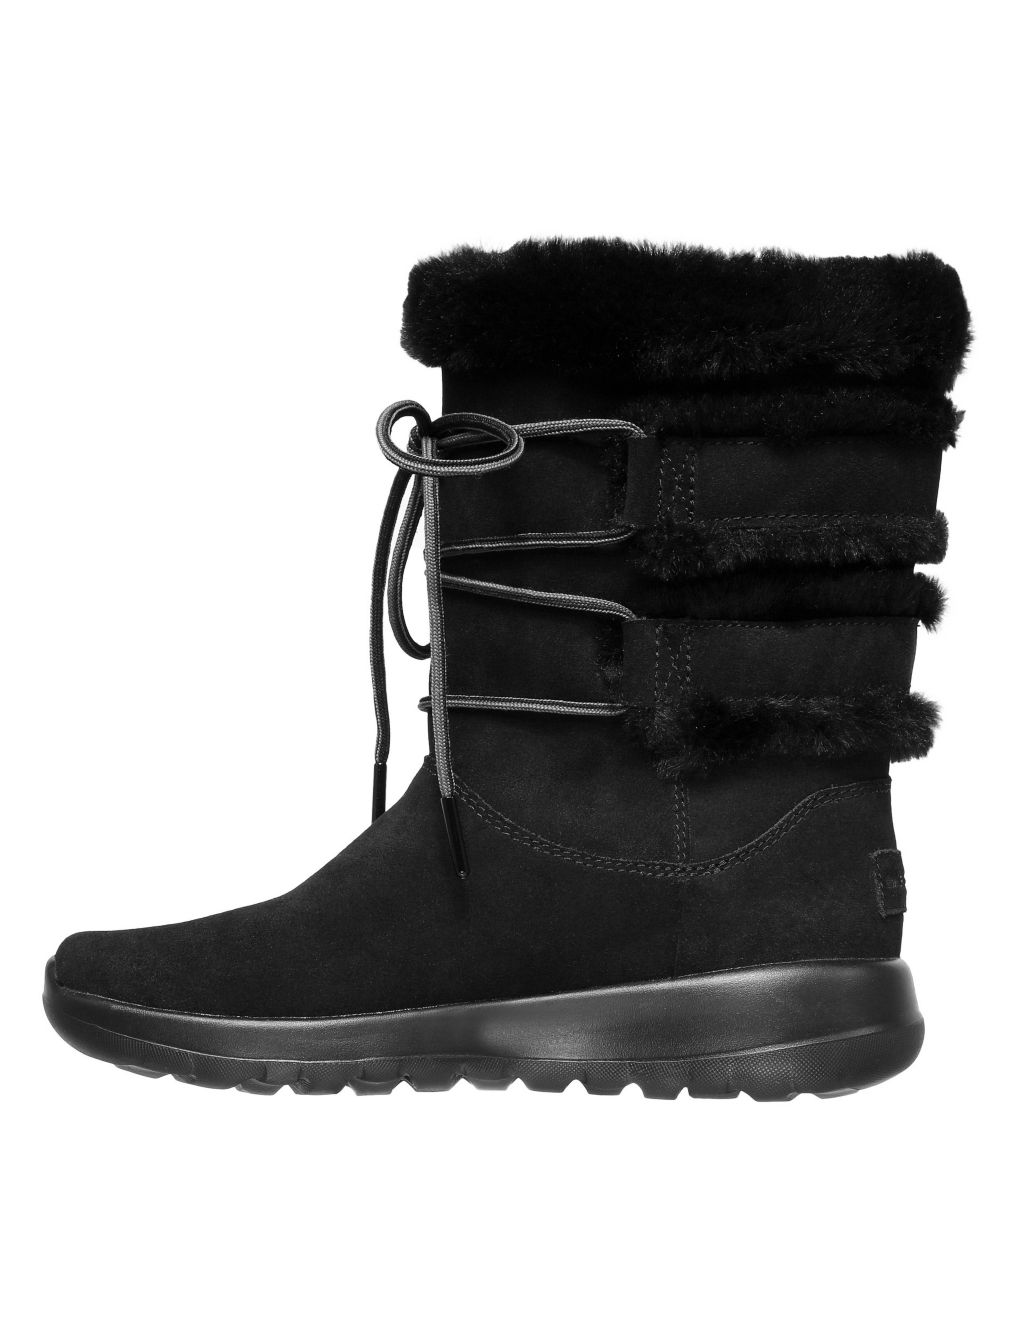 On-The-Go Joy Cyclone Leather Winter Boots image 2